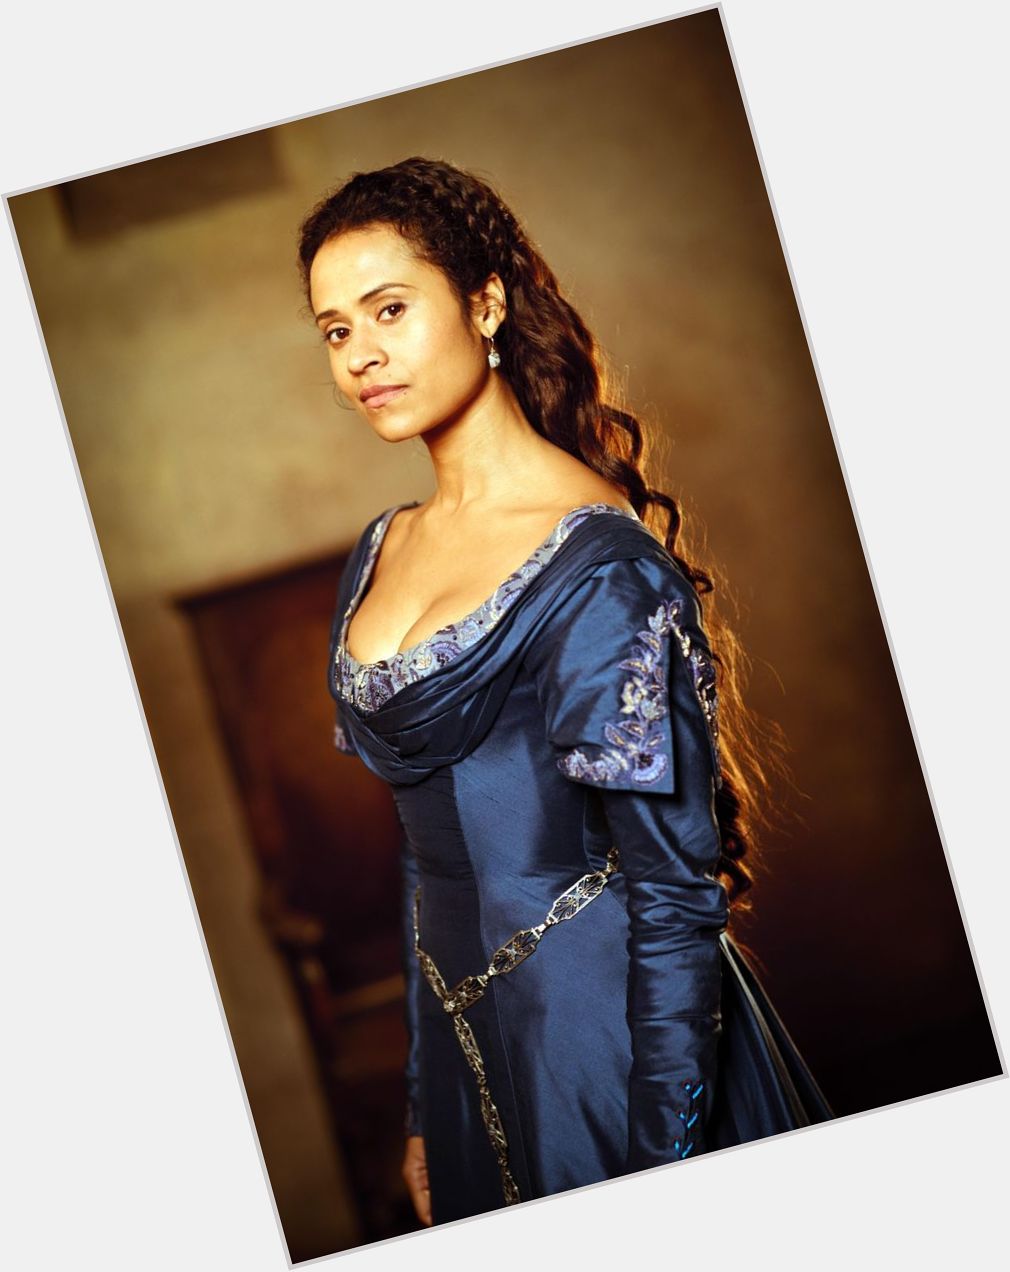 <a href="/hot-women/guinevere/is-she-evil-black-real-merlin-coming-back">Guinevere</a>  